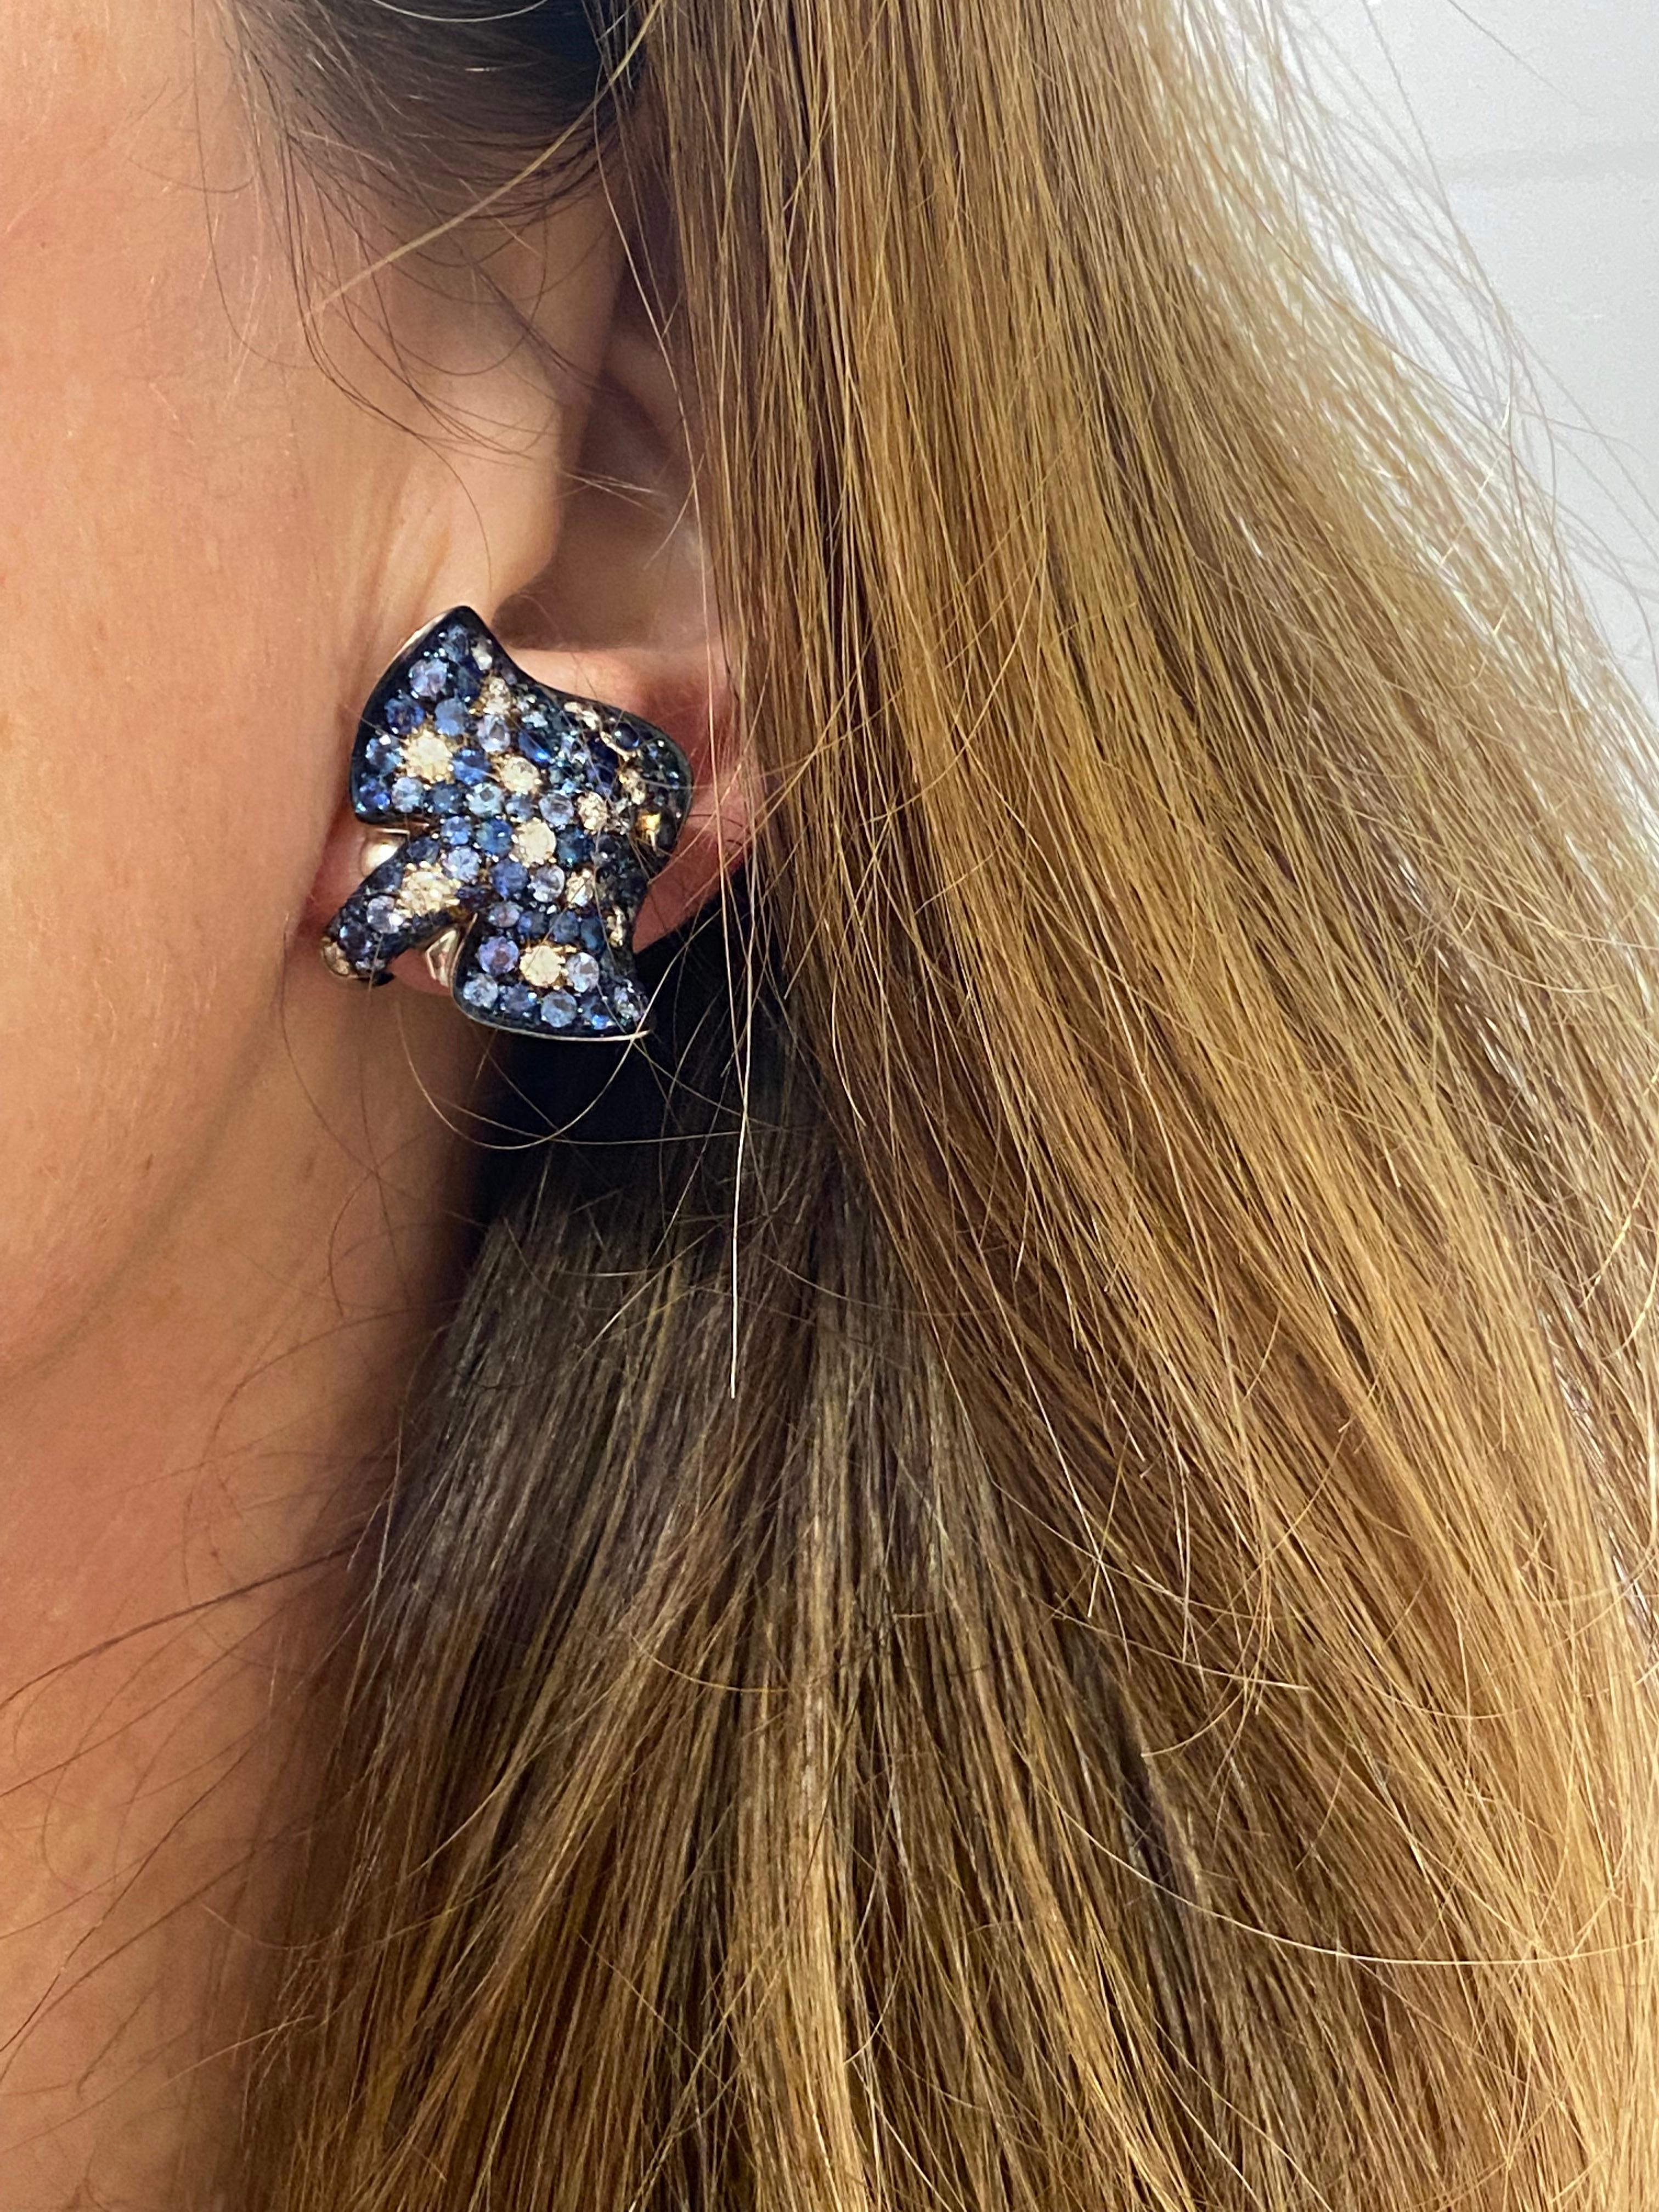 Petronilla Ray Fish White Diamond Blue Sapphire 18Kt Gold Made in Italy Earrings In New Condition For Sale In Bussolengo, Verona